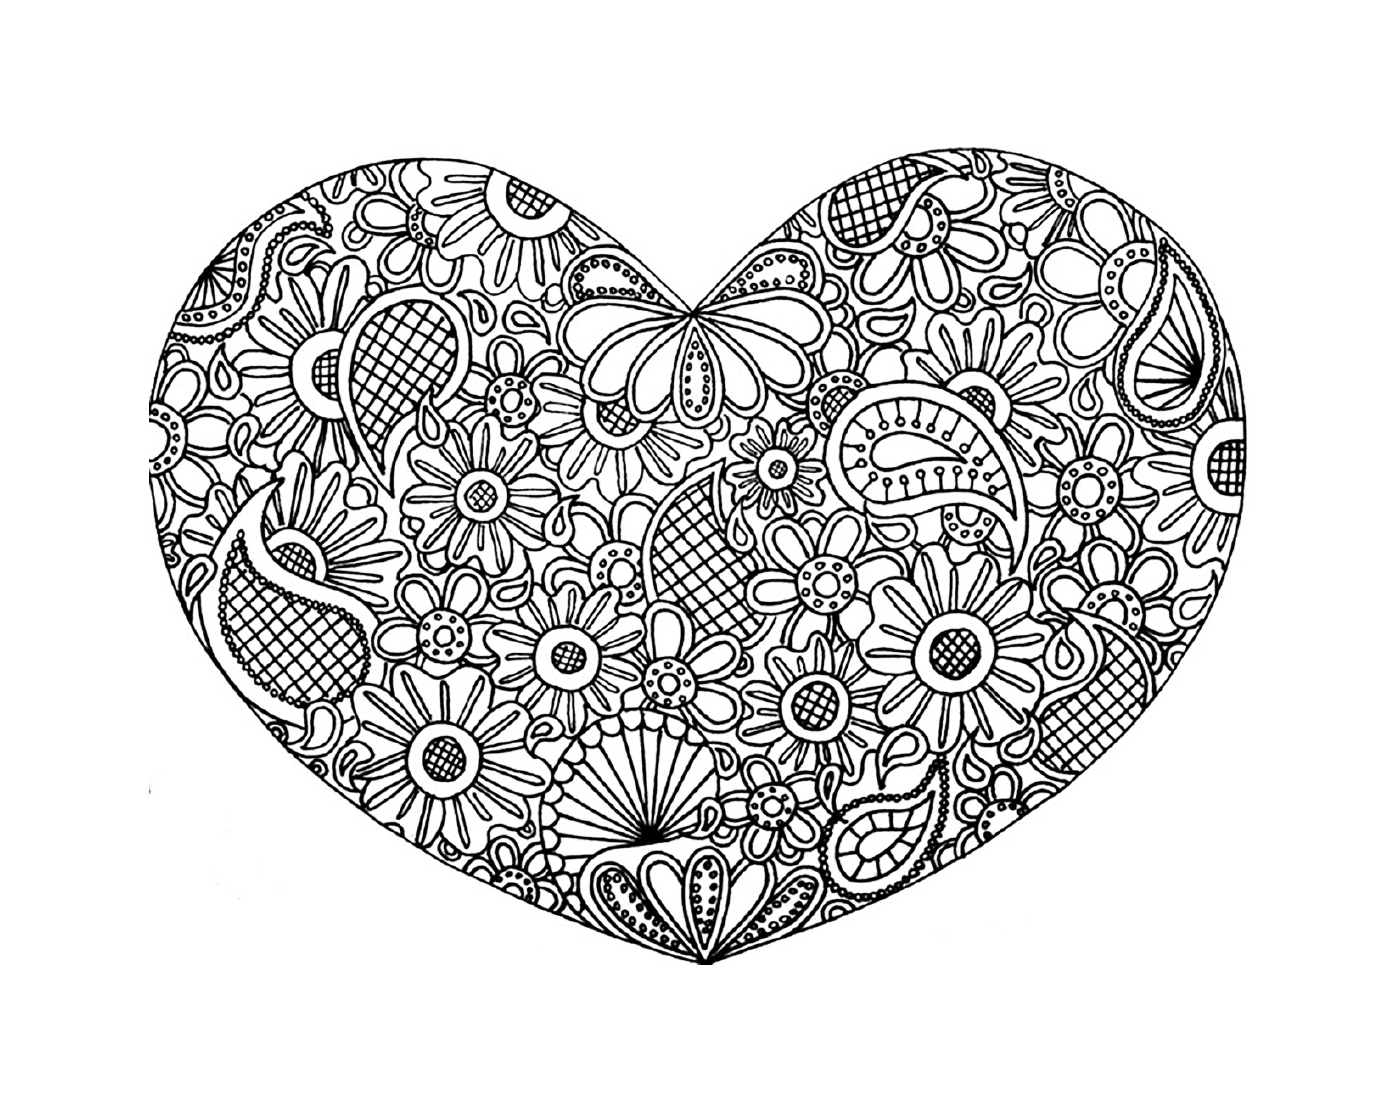  A complex heart with doodles 